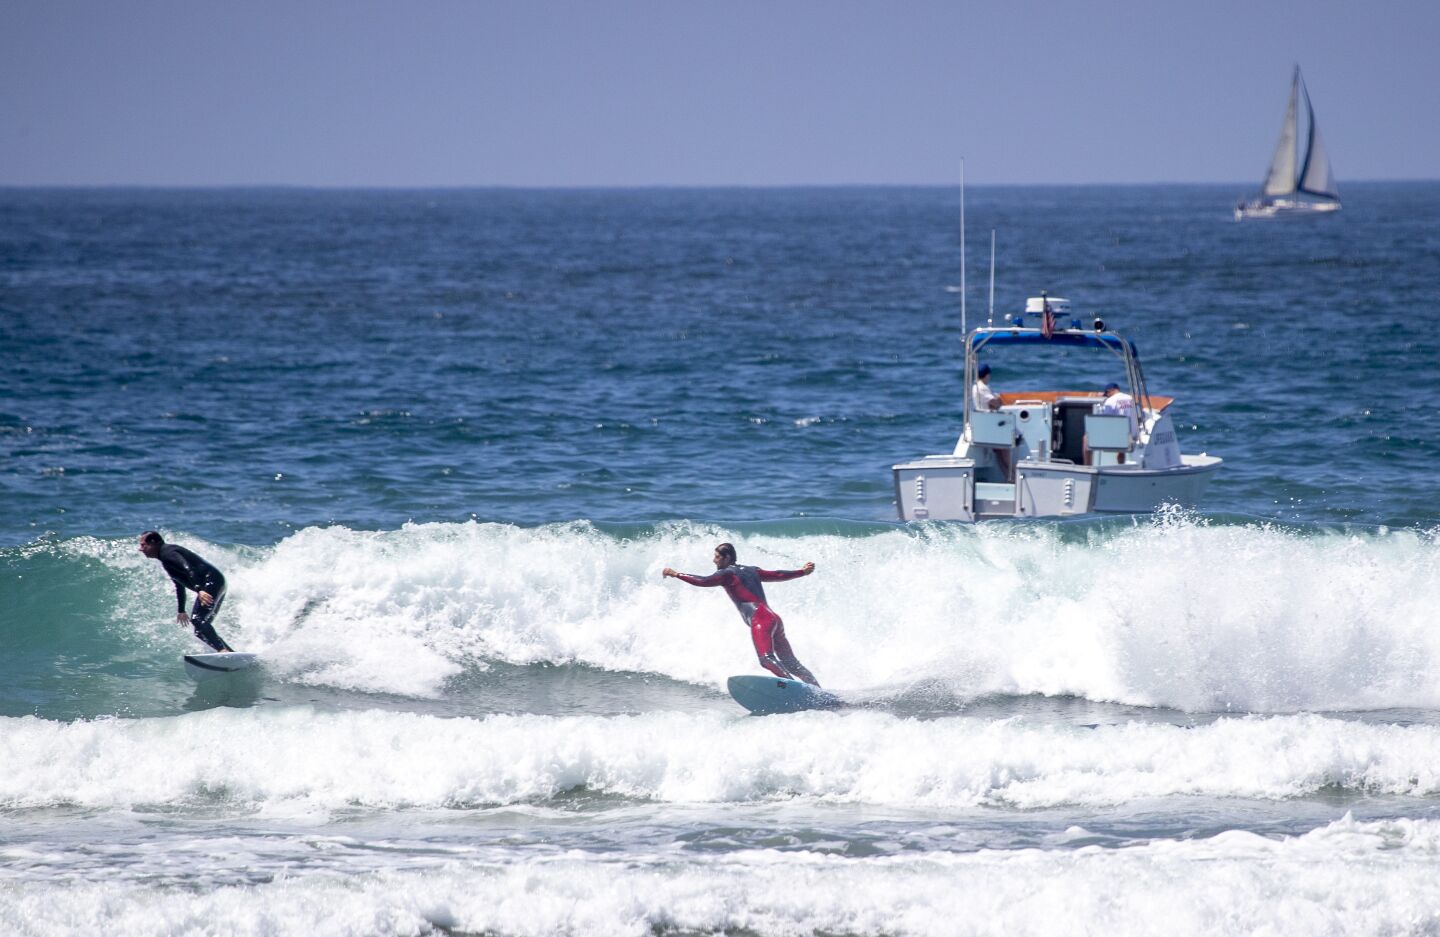 Lifeguards patrol with a boat as surfers ride waves